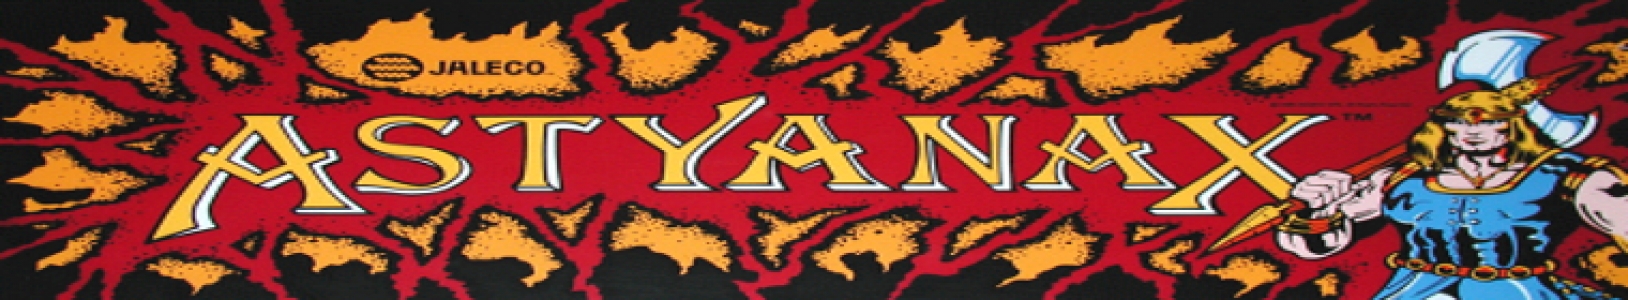 The Astyanax banner